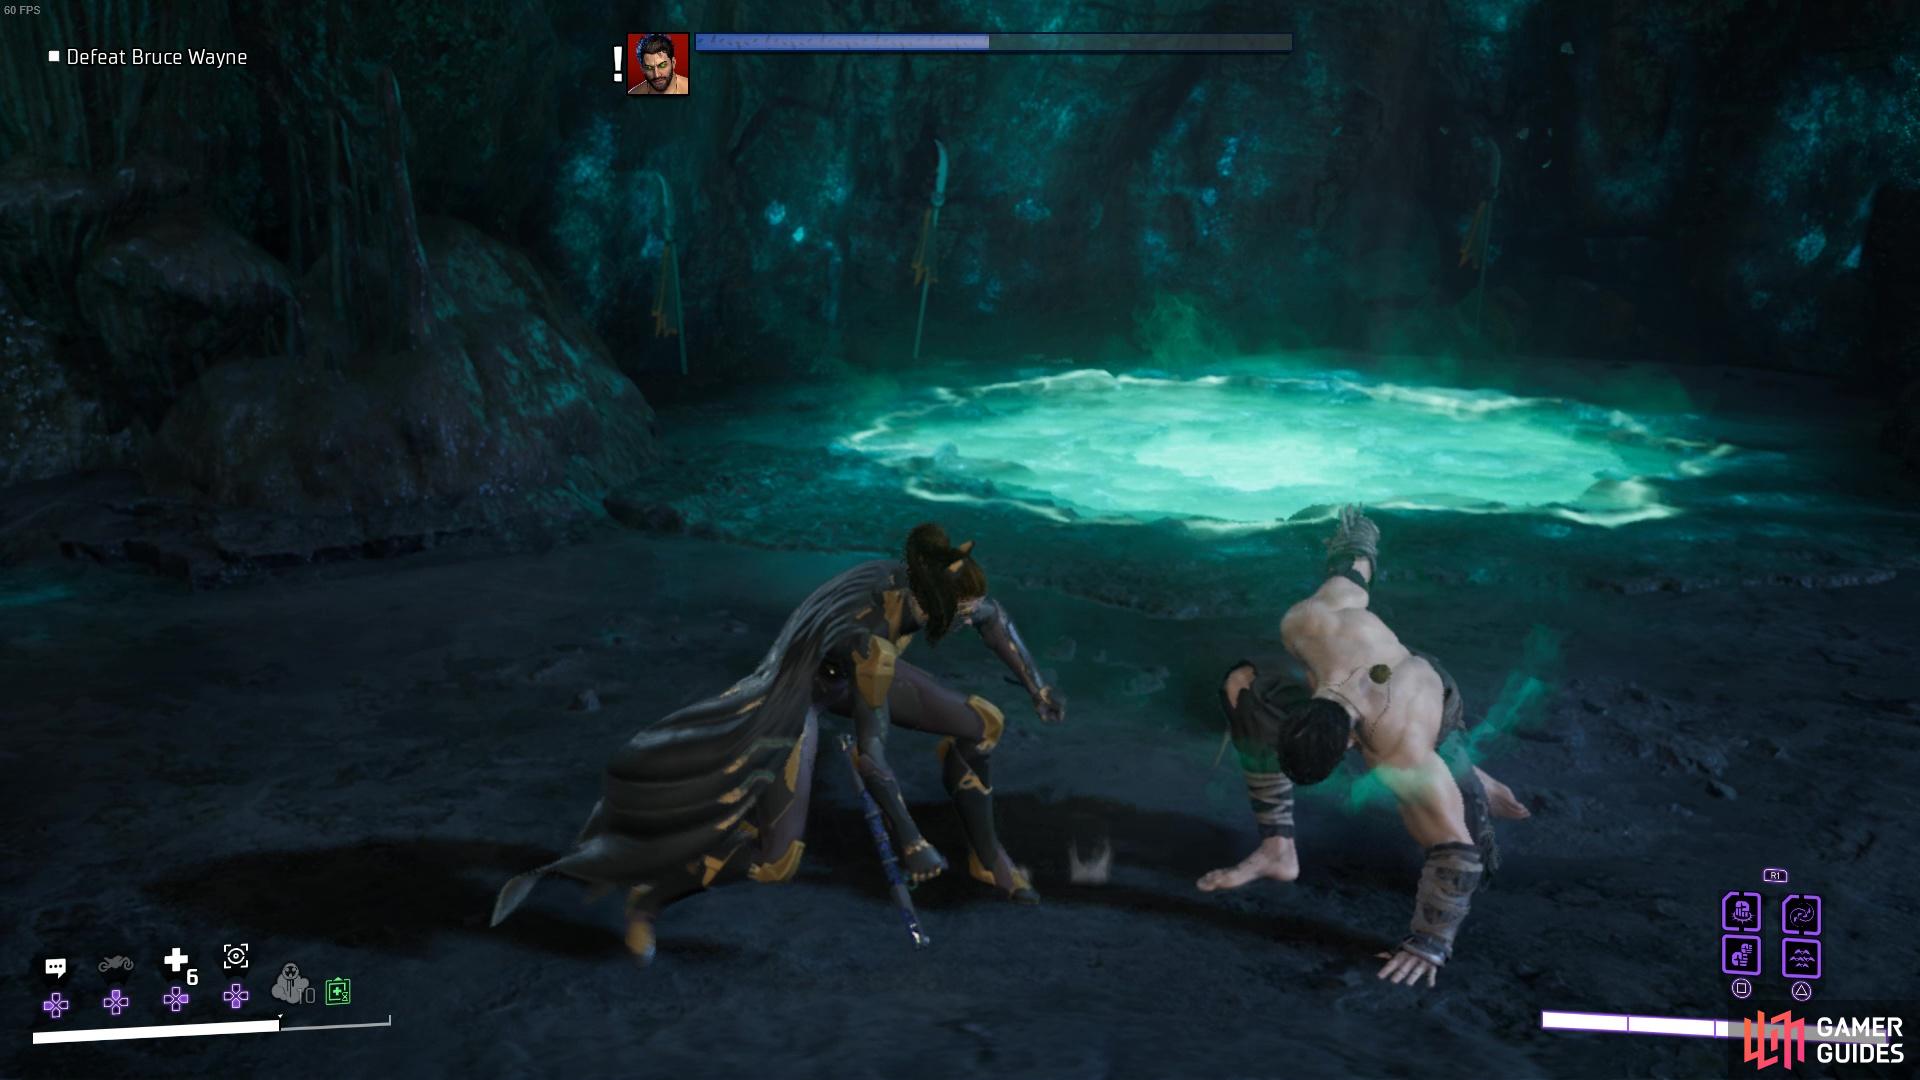 Hand-to-hand combat with Batman can feel quite rewarding if you time your dodges well!